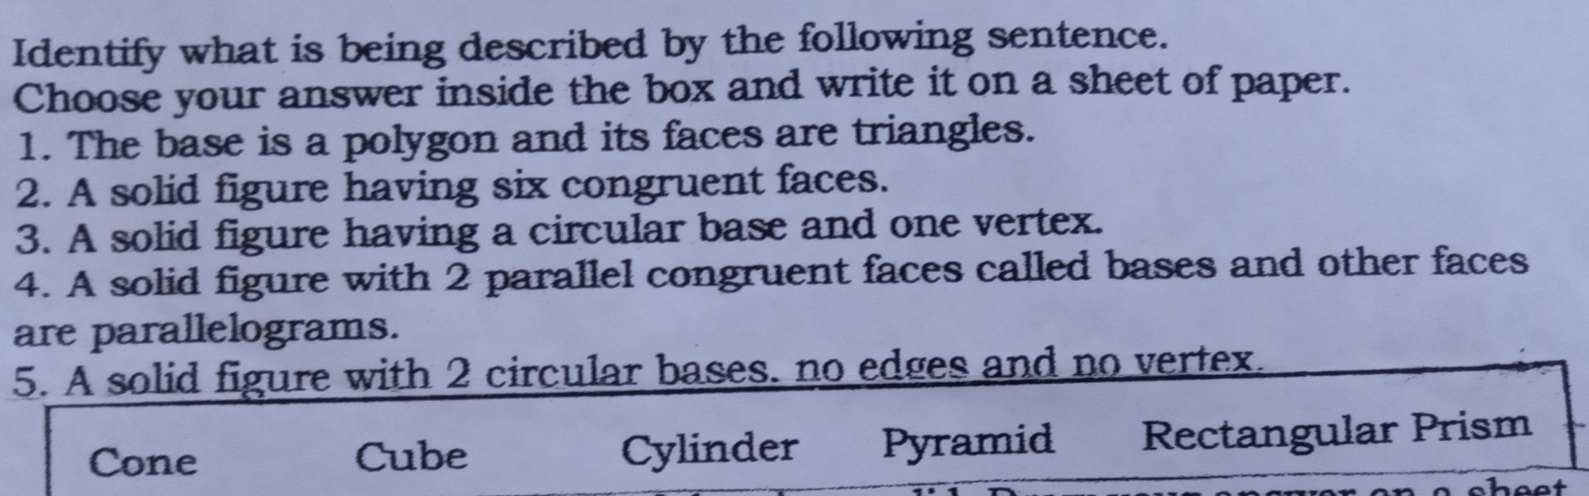 Identify what is being described by the following sentence. Choose your answer inside the box and write it on a sheet of paper. 1. The base is a polygon and its faces are triangles. 2. A solid figure having six congruent faces. 3. A solid figure having a circular base and one vertex. 4. A solid figure with 2 parallel congruent faces called bases and other faces are parallelograms. 5. A solid figure with 2 circular bases. no edges and no vertex Cone Cube Cylinder Pyramid Rectangular Prism